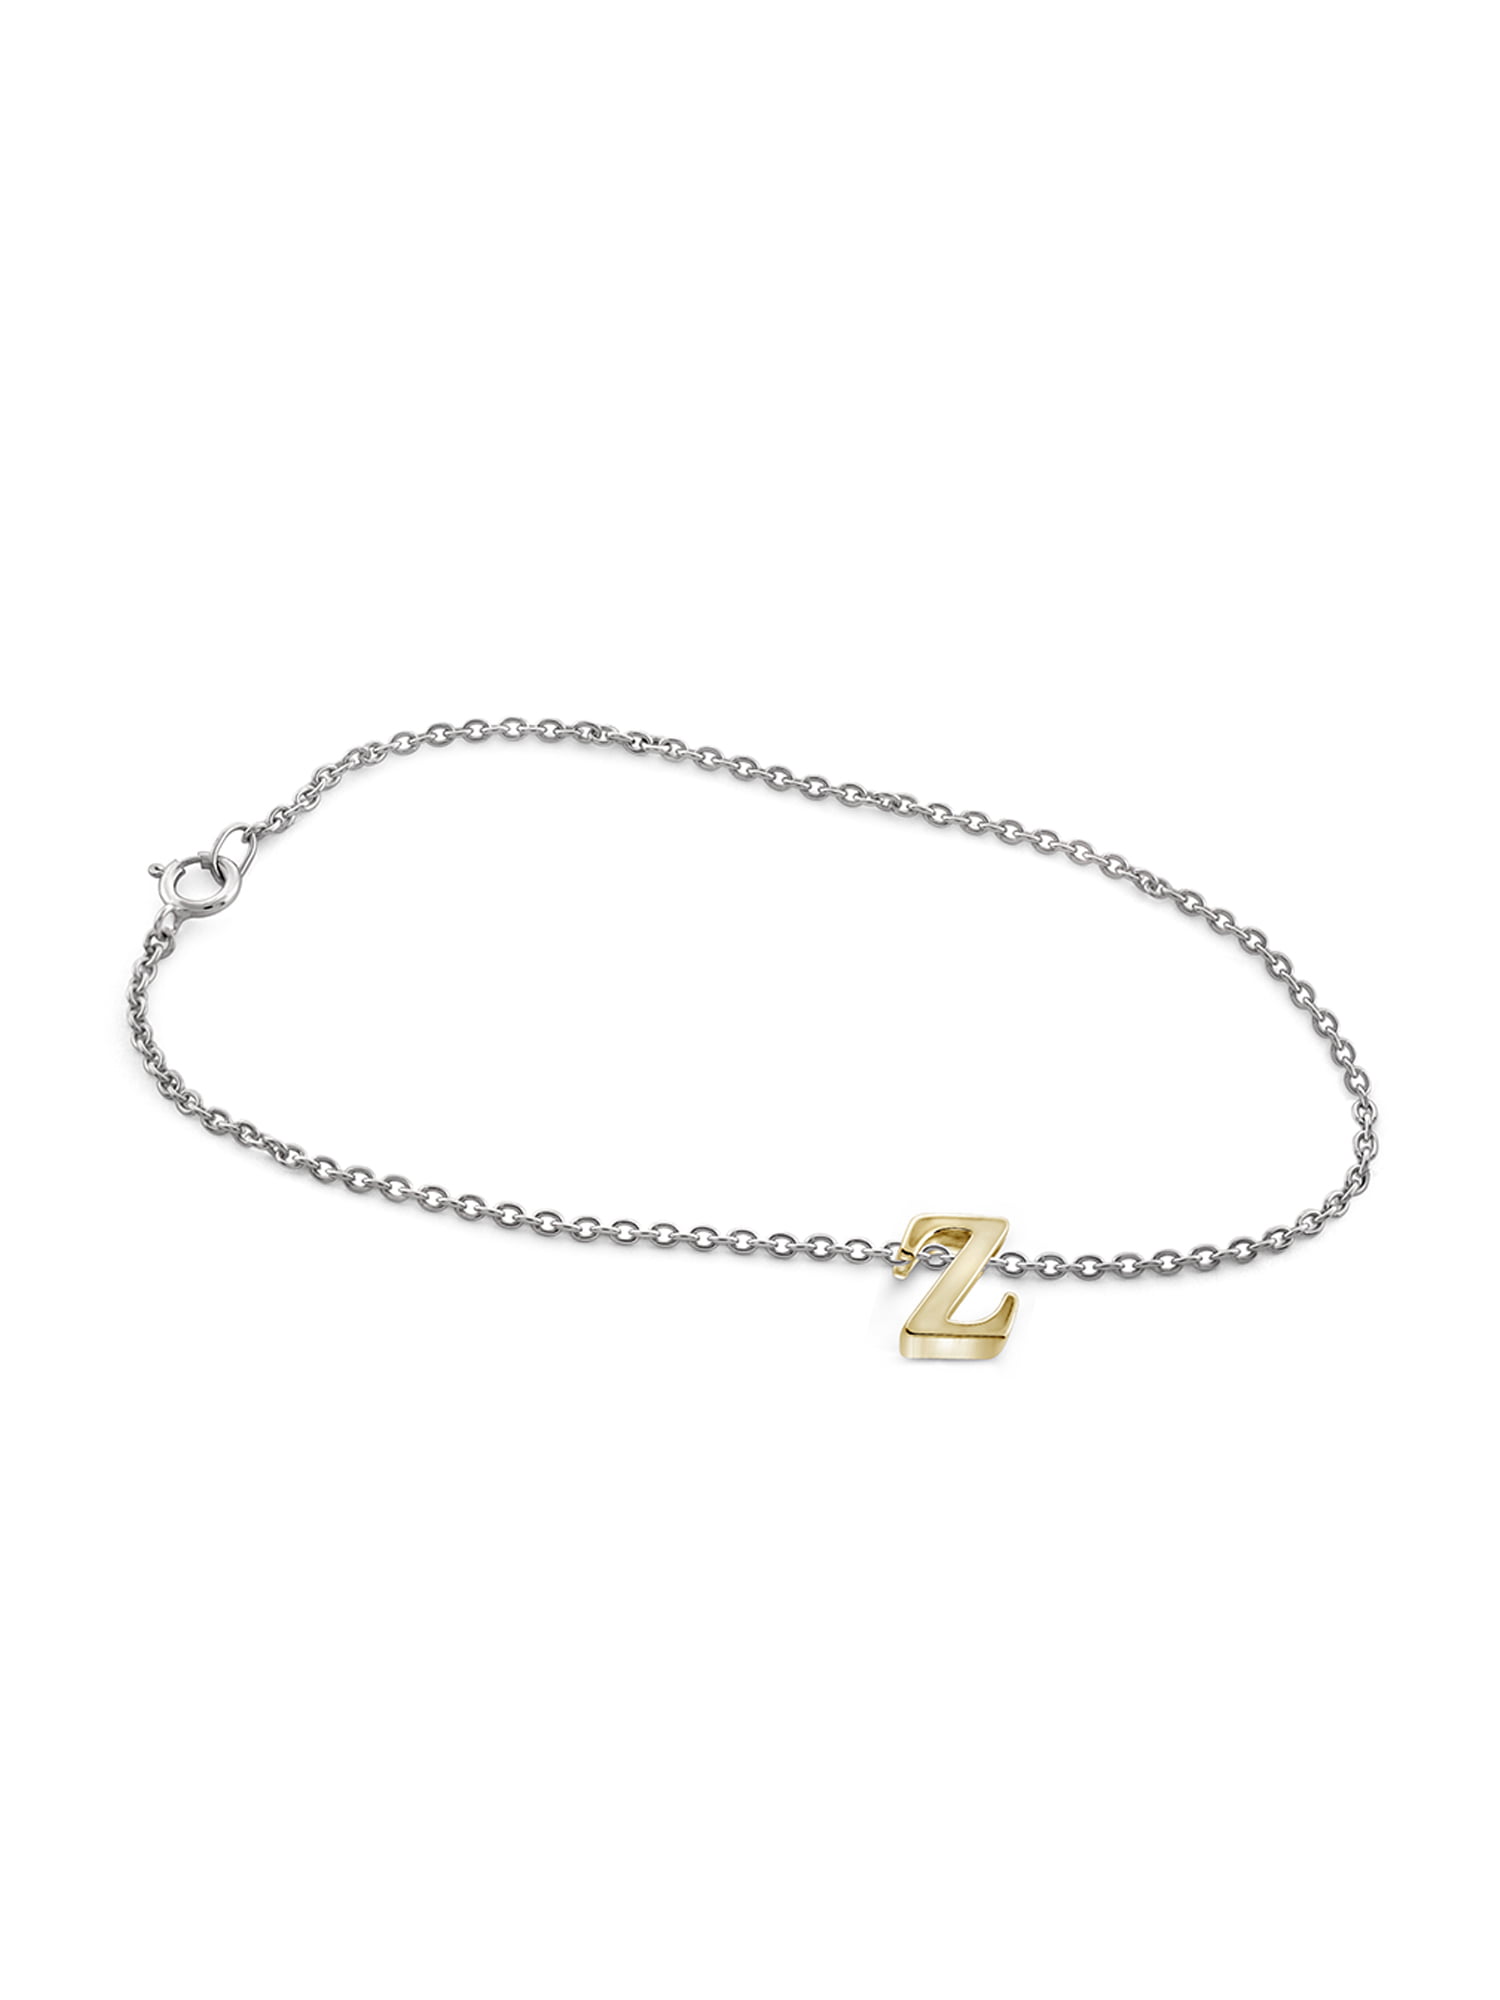 Select Your Initial A to Z Charm Bracelet in Gold Over Silver, Women's, Size: One Size